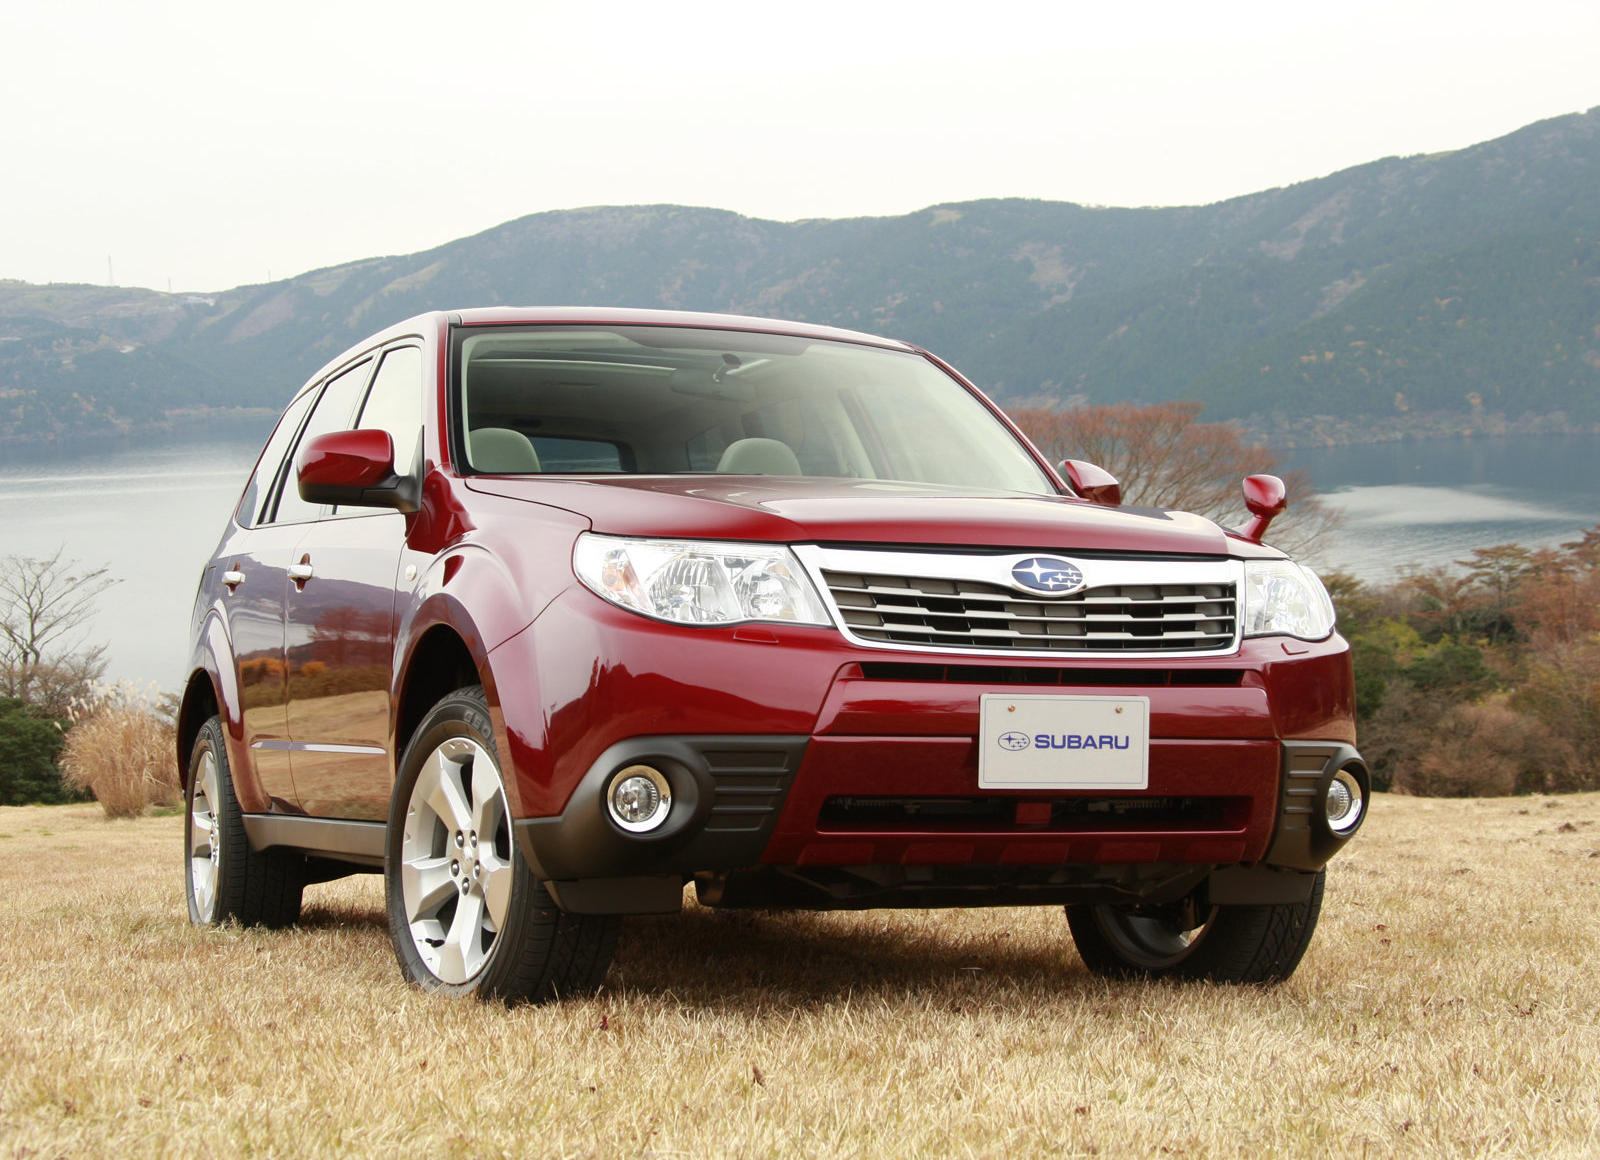 2010 Subaru Forester Review, Trims, Specs, Price, New